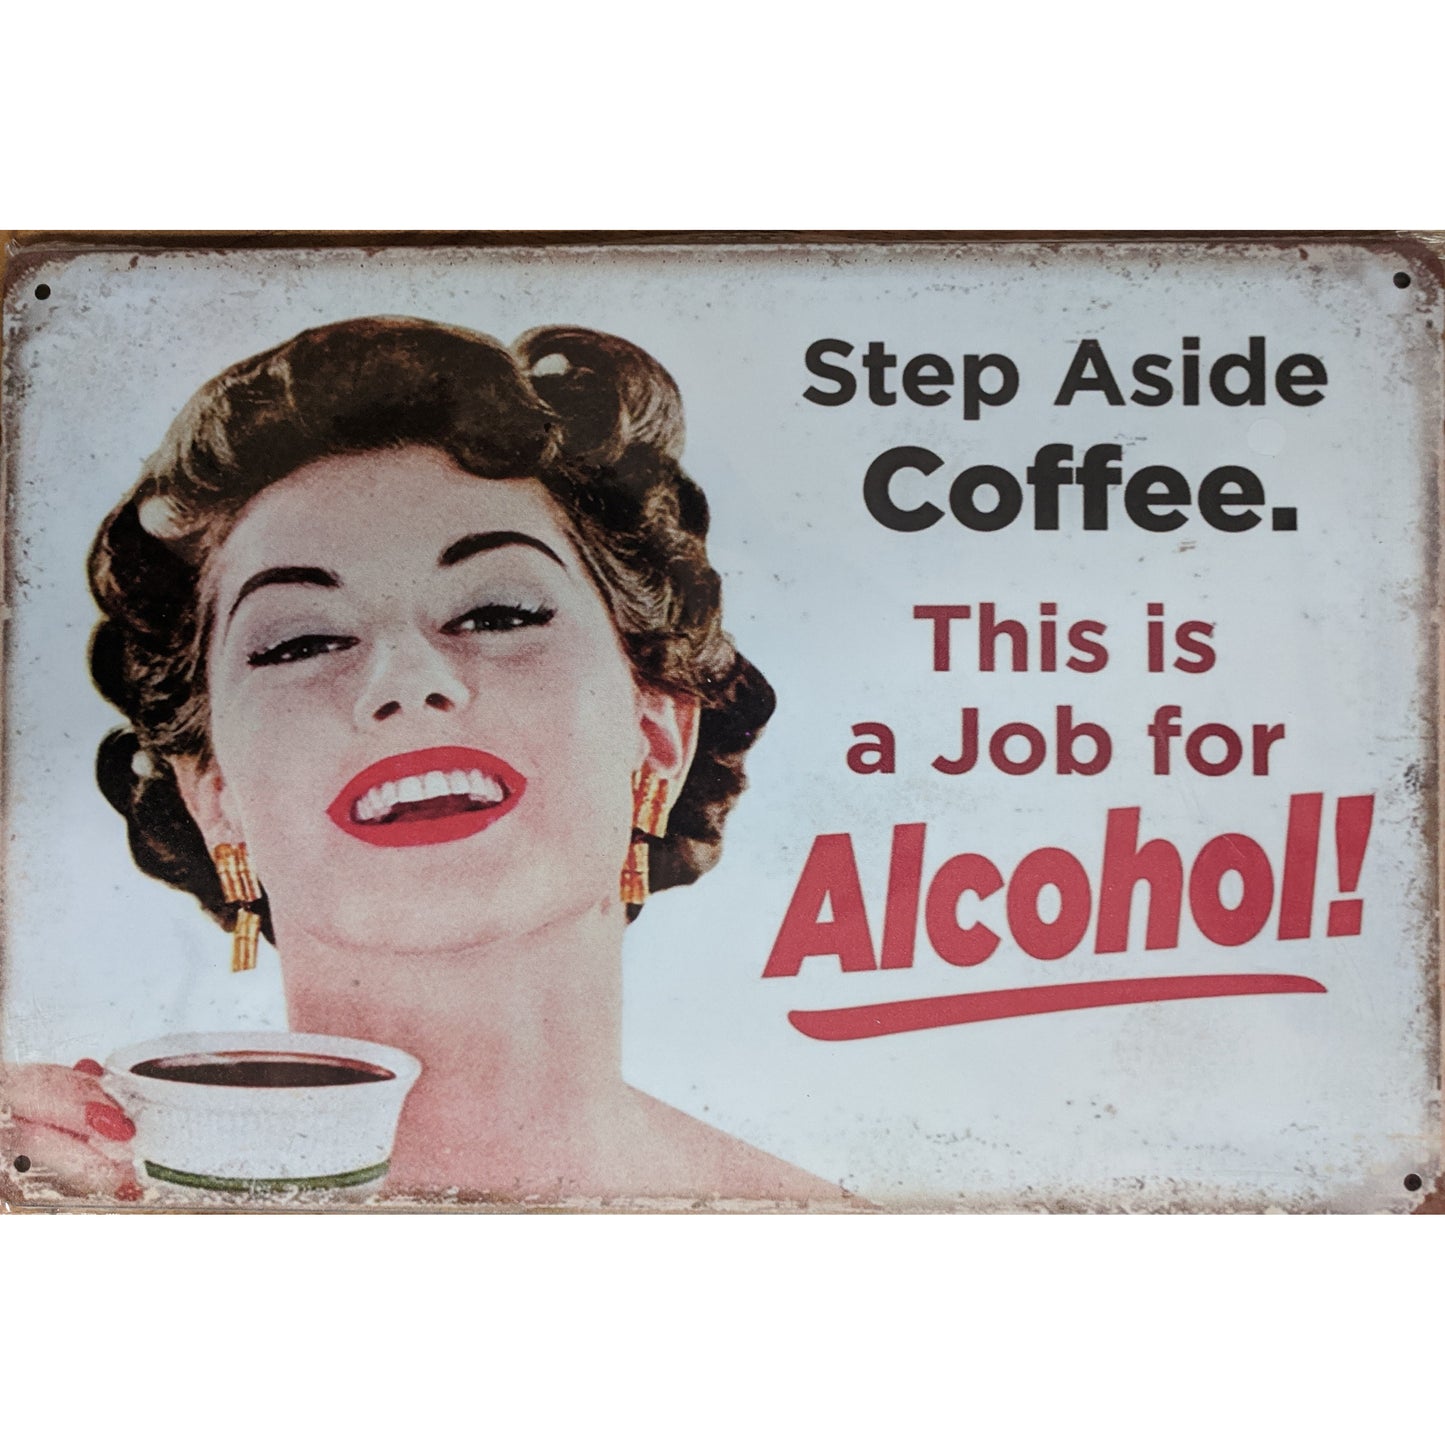 This is a Job for Achohol - 8"x11" - Tin Sign